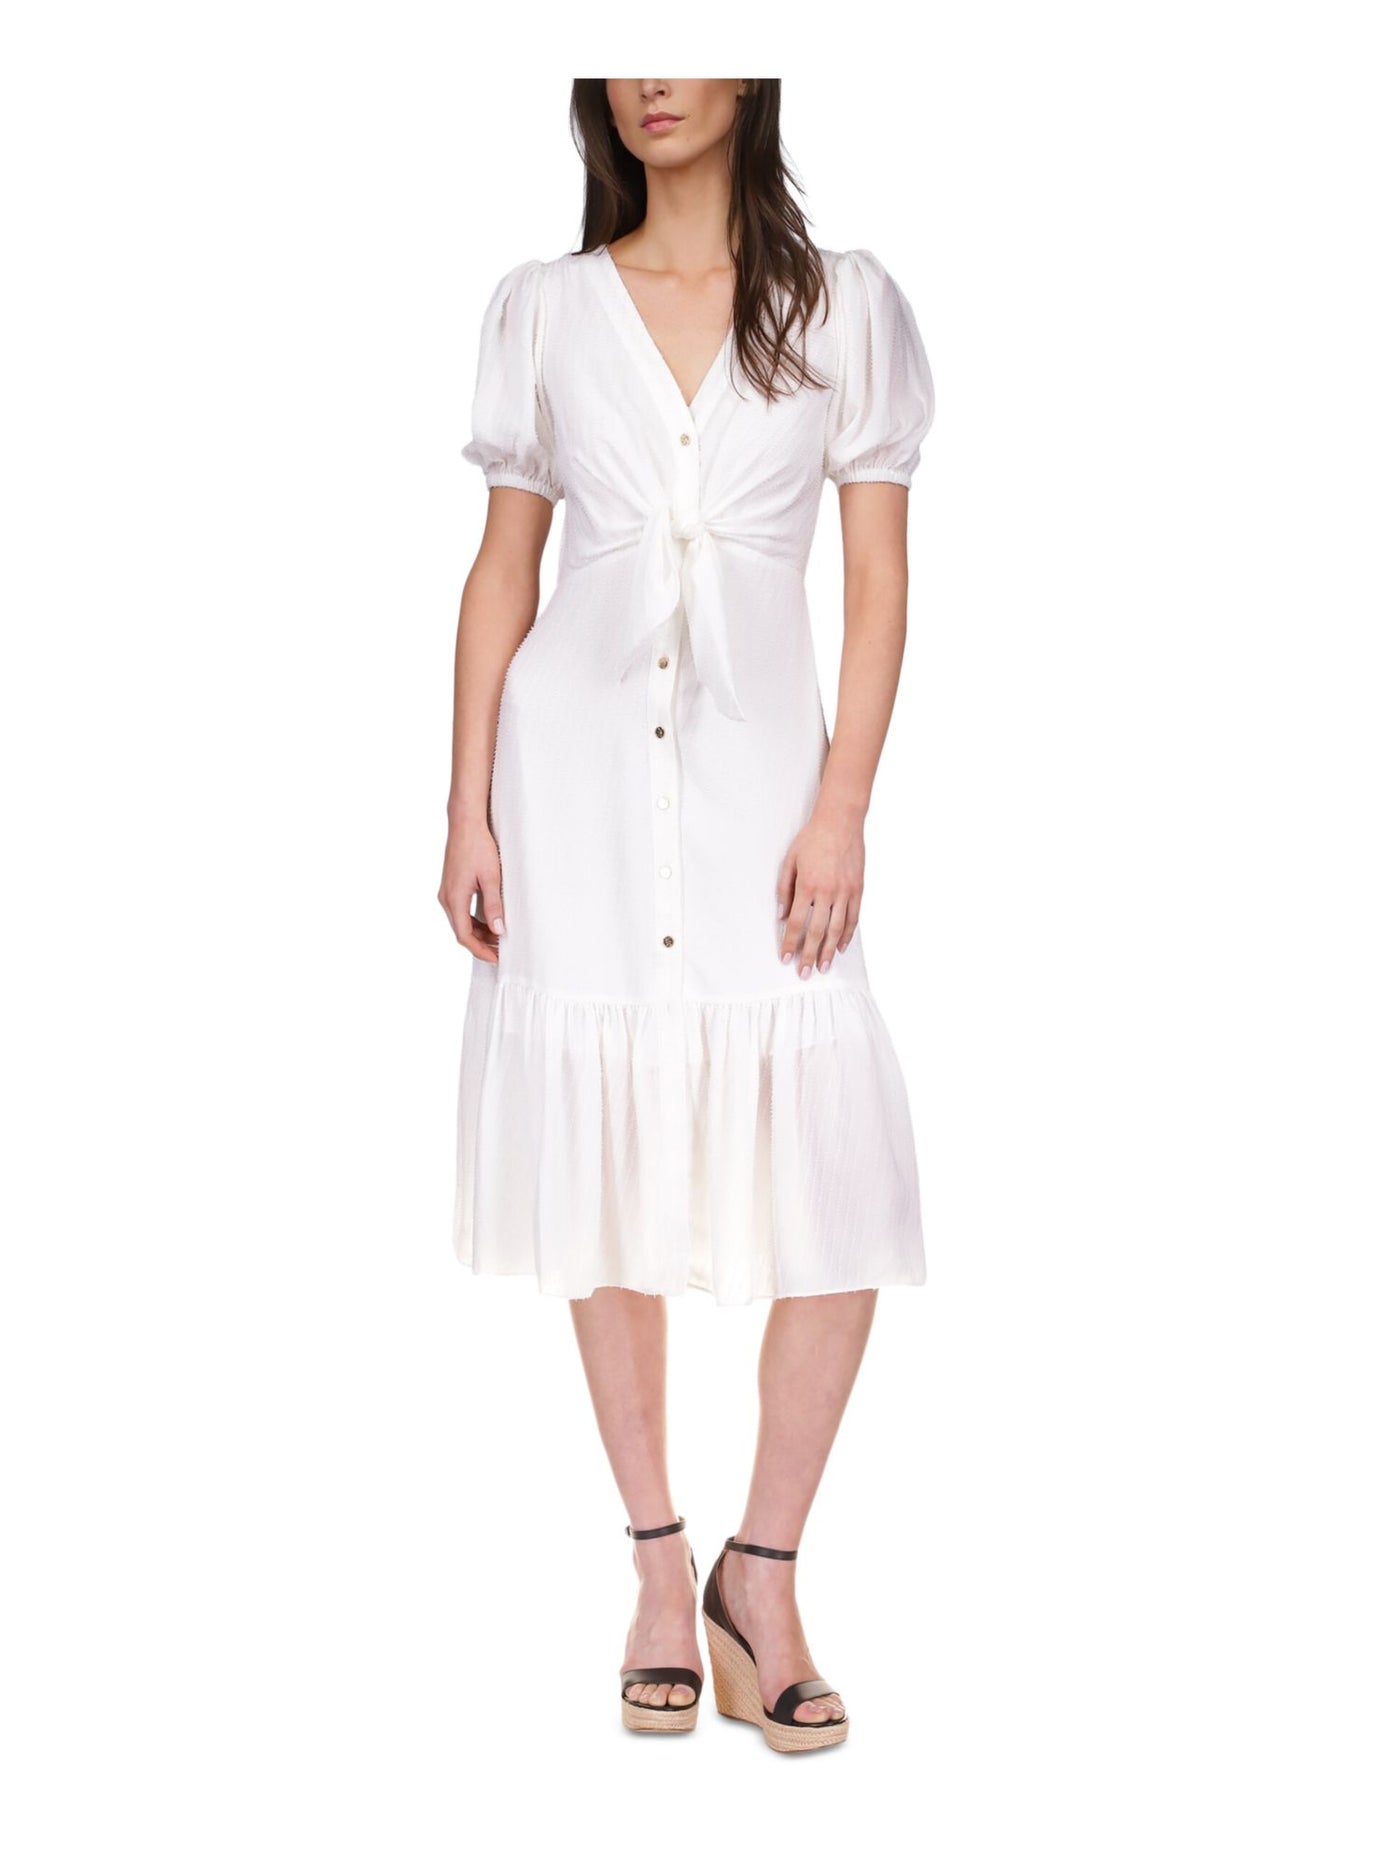 MICHAEL MICHAEL KORS Womens White Lined Gathered Button Up Tie Accent Ruffled Pouf Sleeve V Neck Below The Knee Fit + Flare Dress Petites P\M